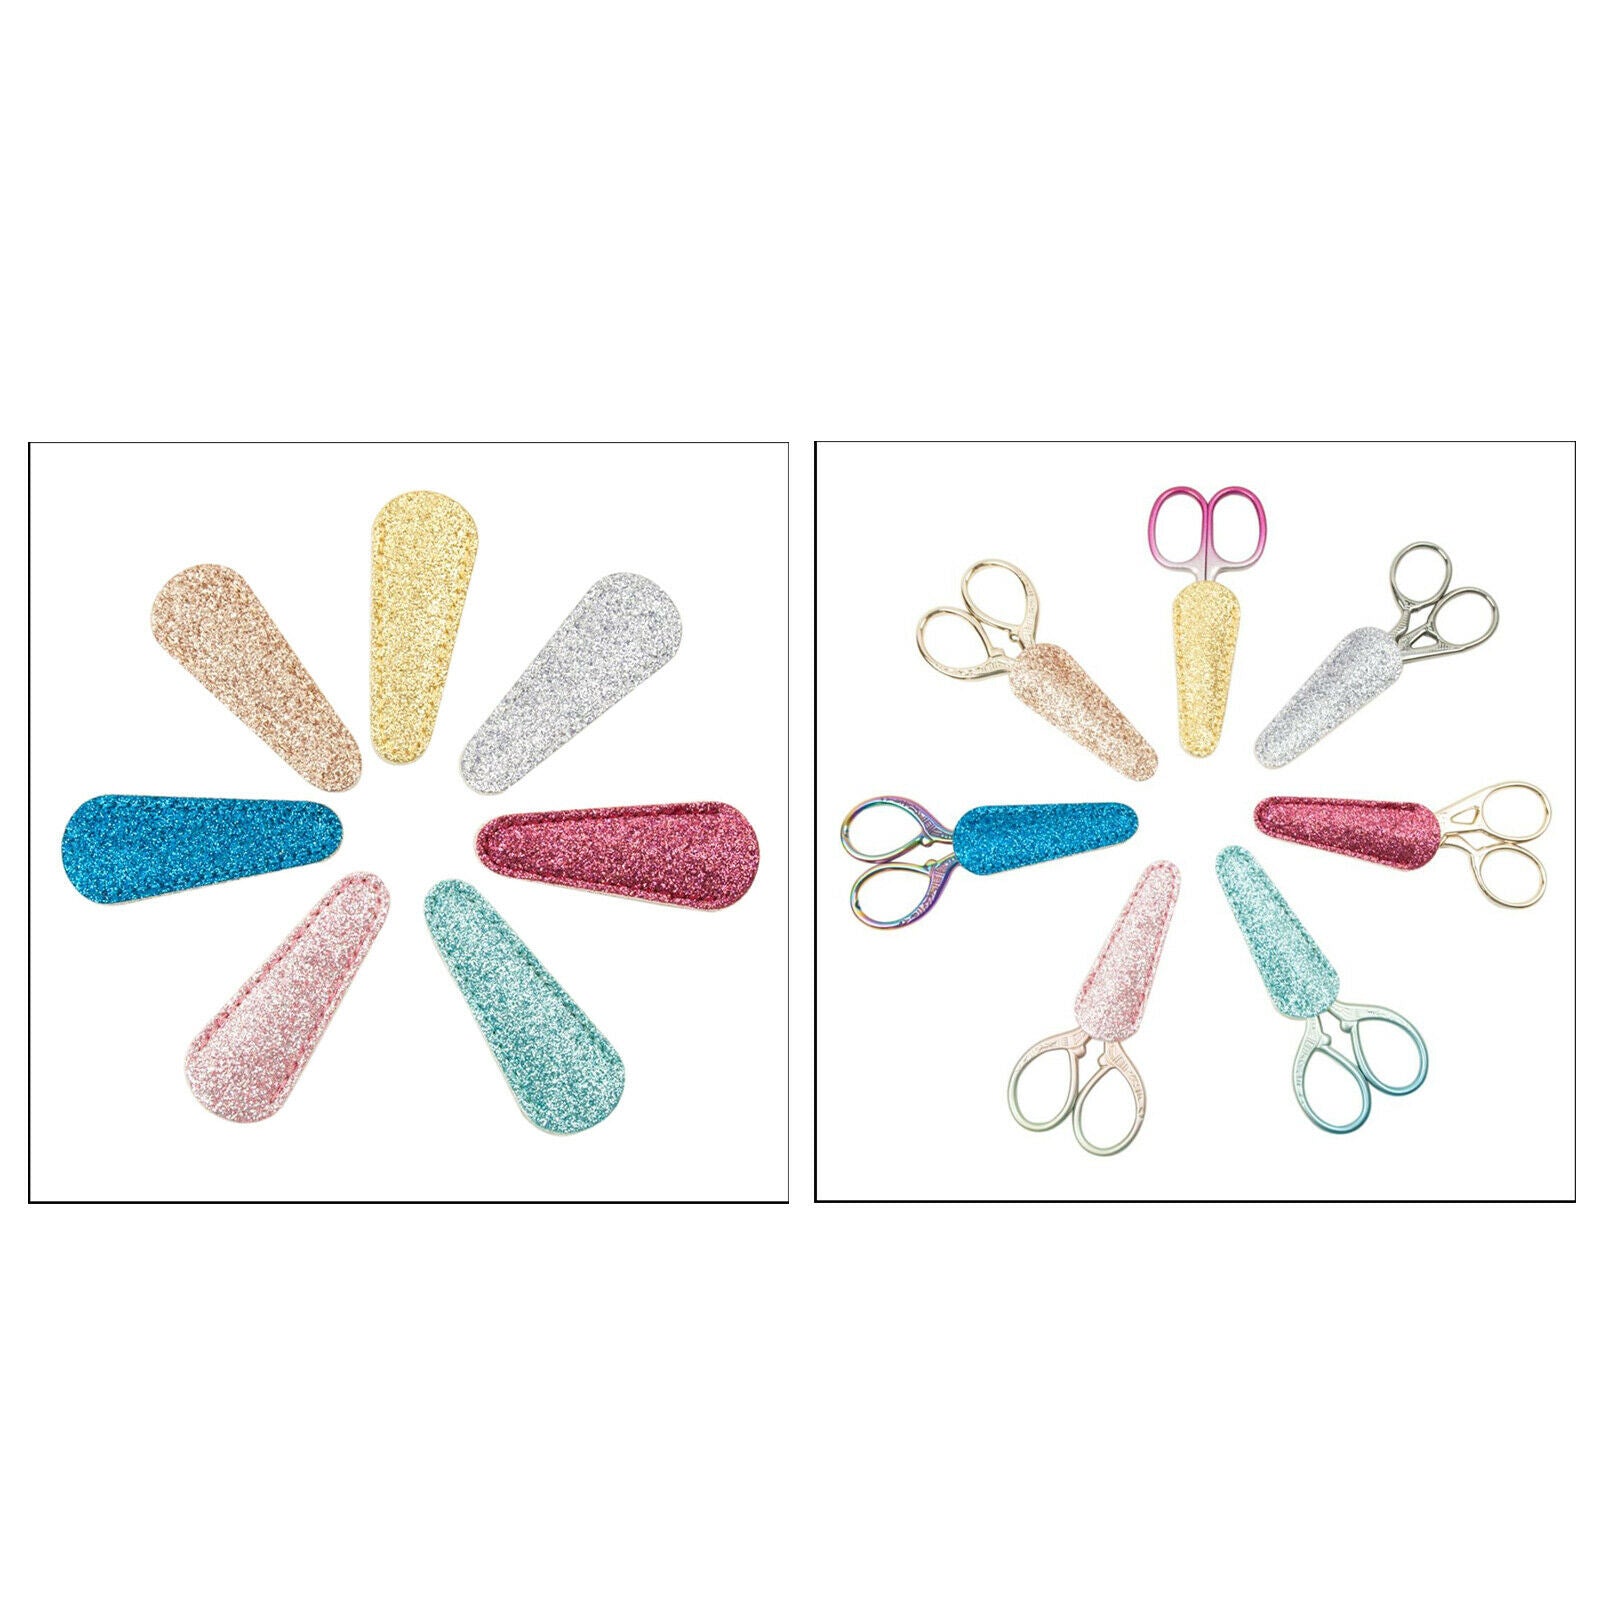 7Pcs Embroidery Scissors Sheath Sewing Shears Protector Cover Bags Case